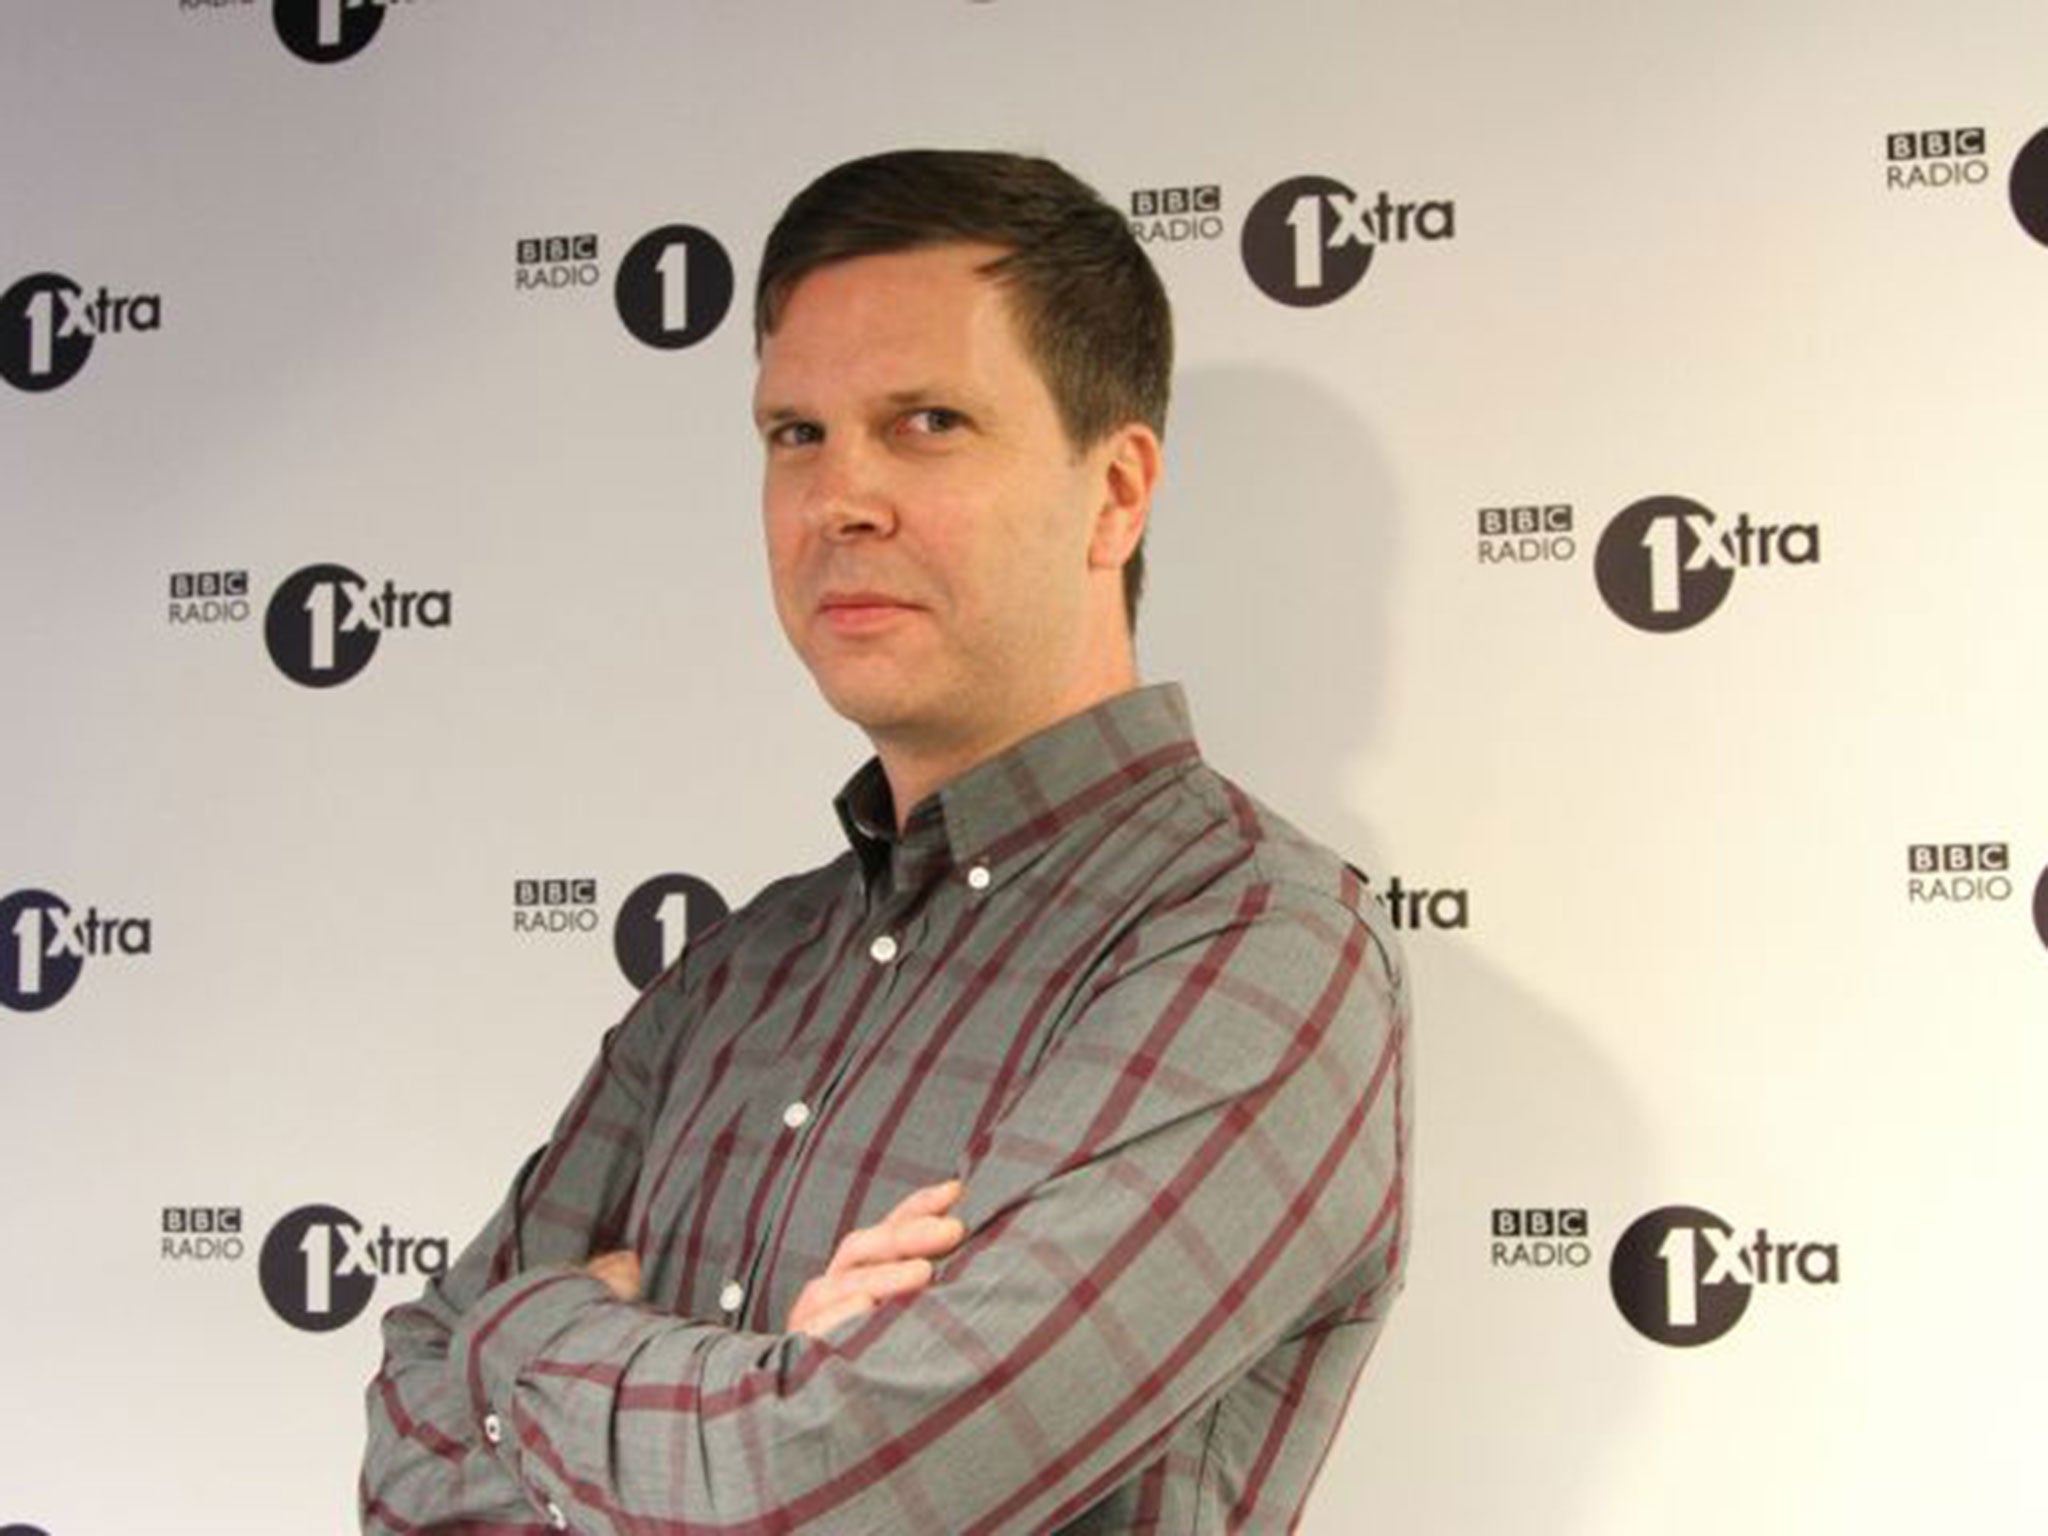 ‘Music content strategist’ Chris Price is to be the new head of music at BBC Radio 1 and 1Xtra